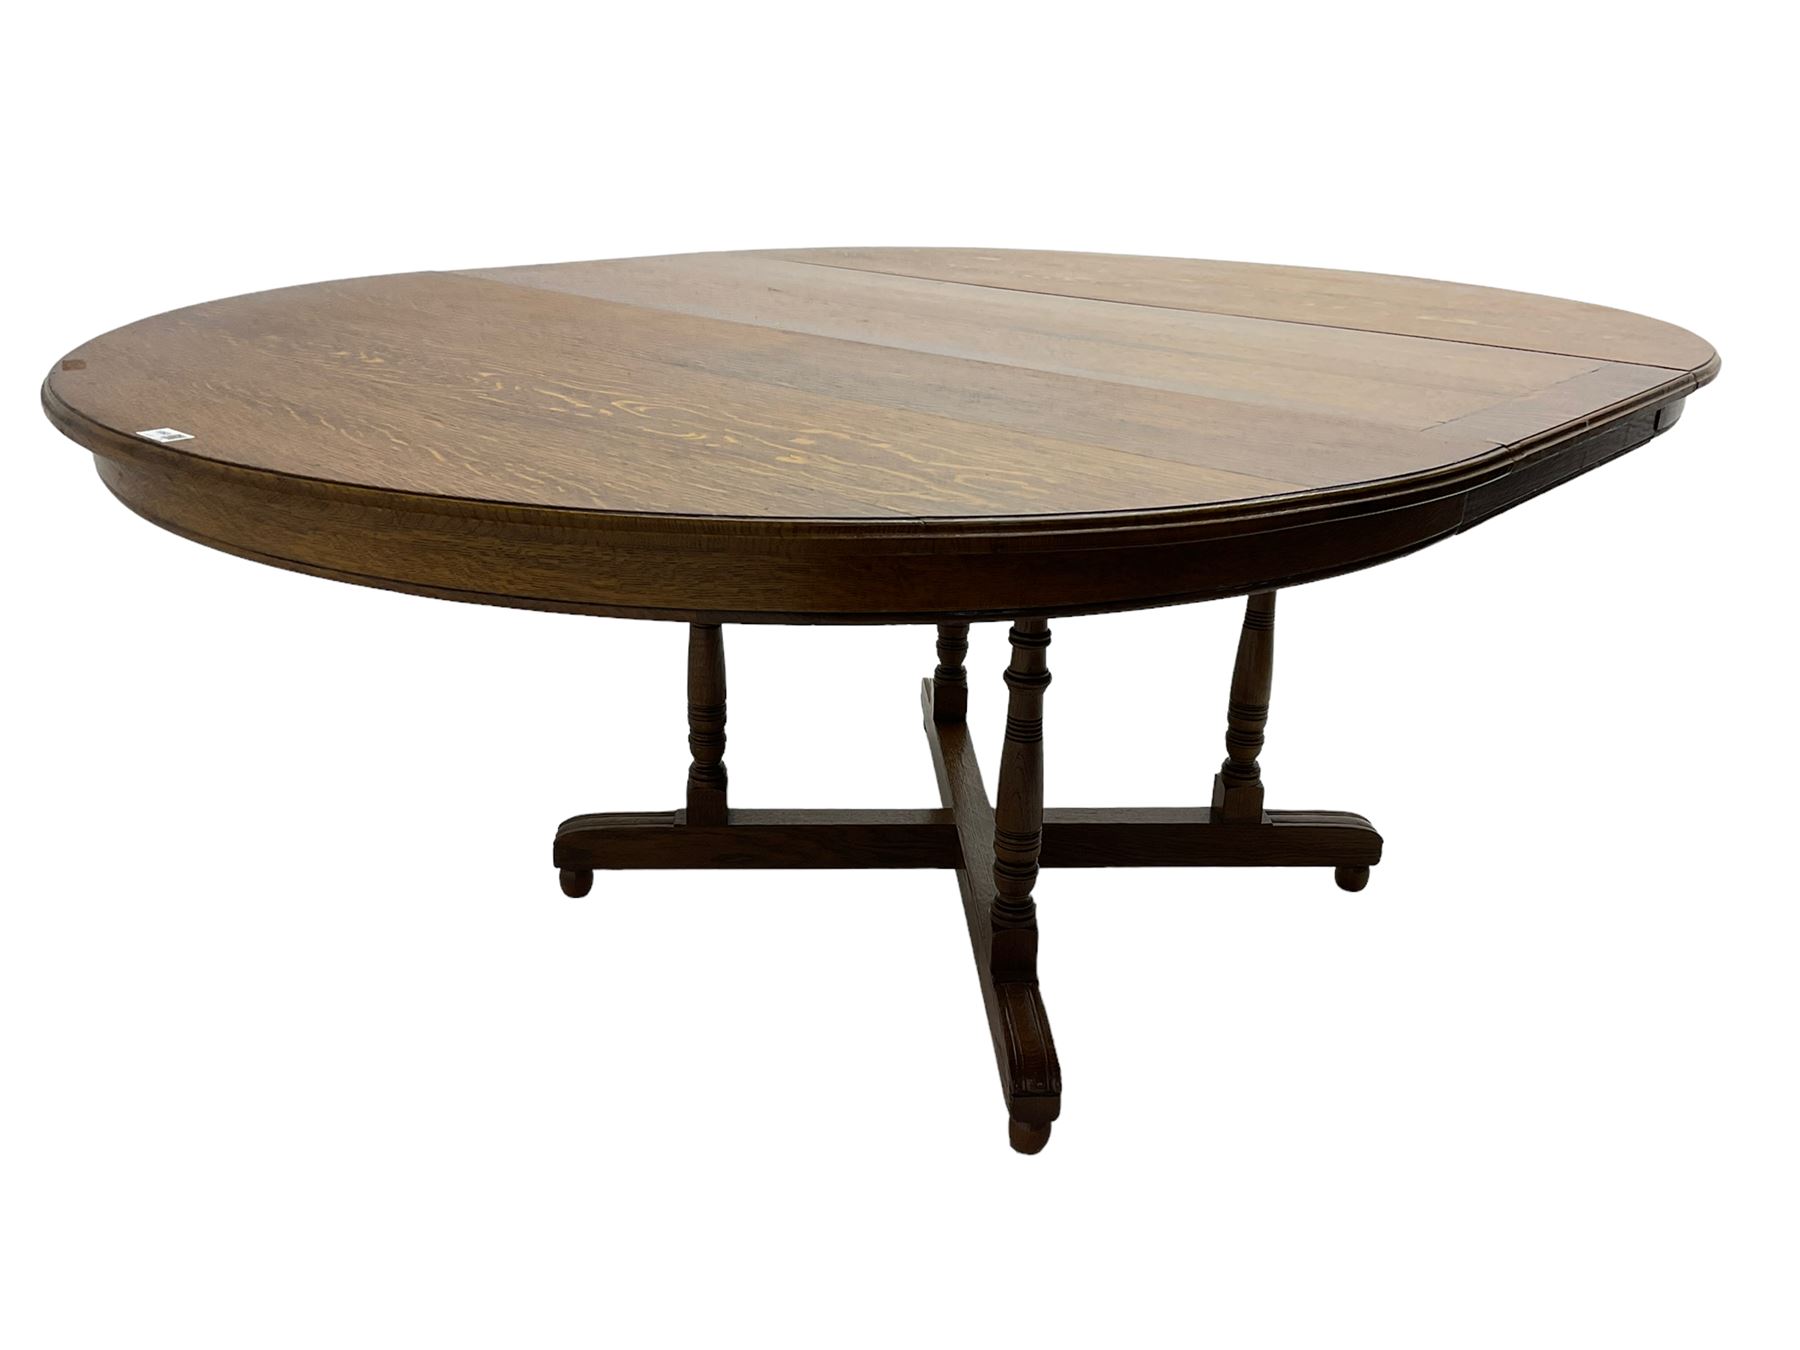 Early 20th century oak dining table - Image 5 of 8